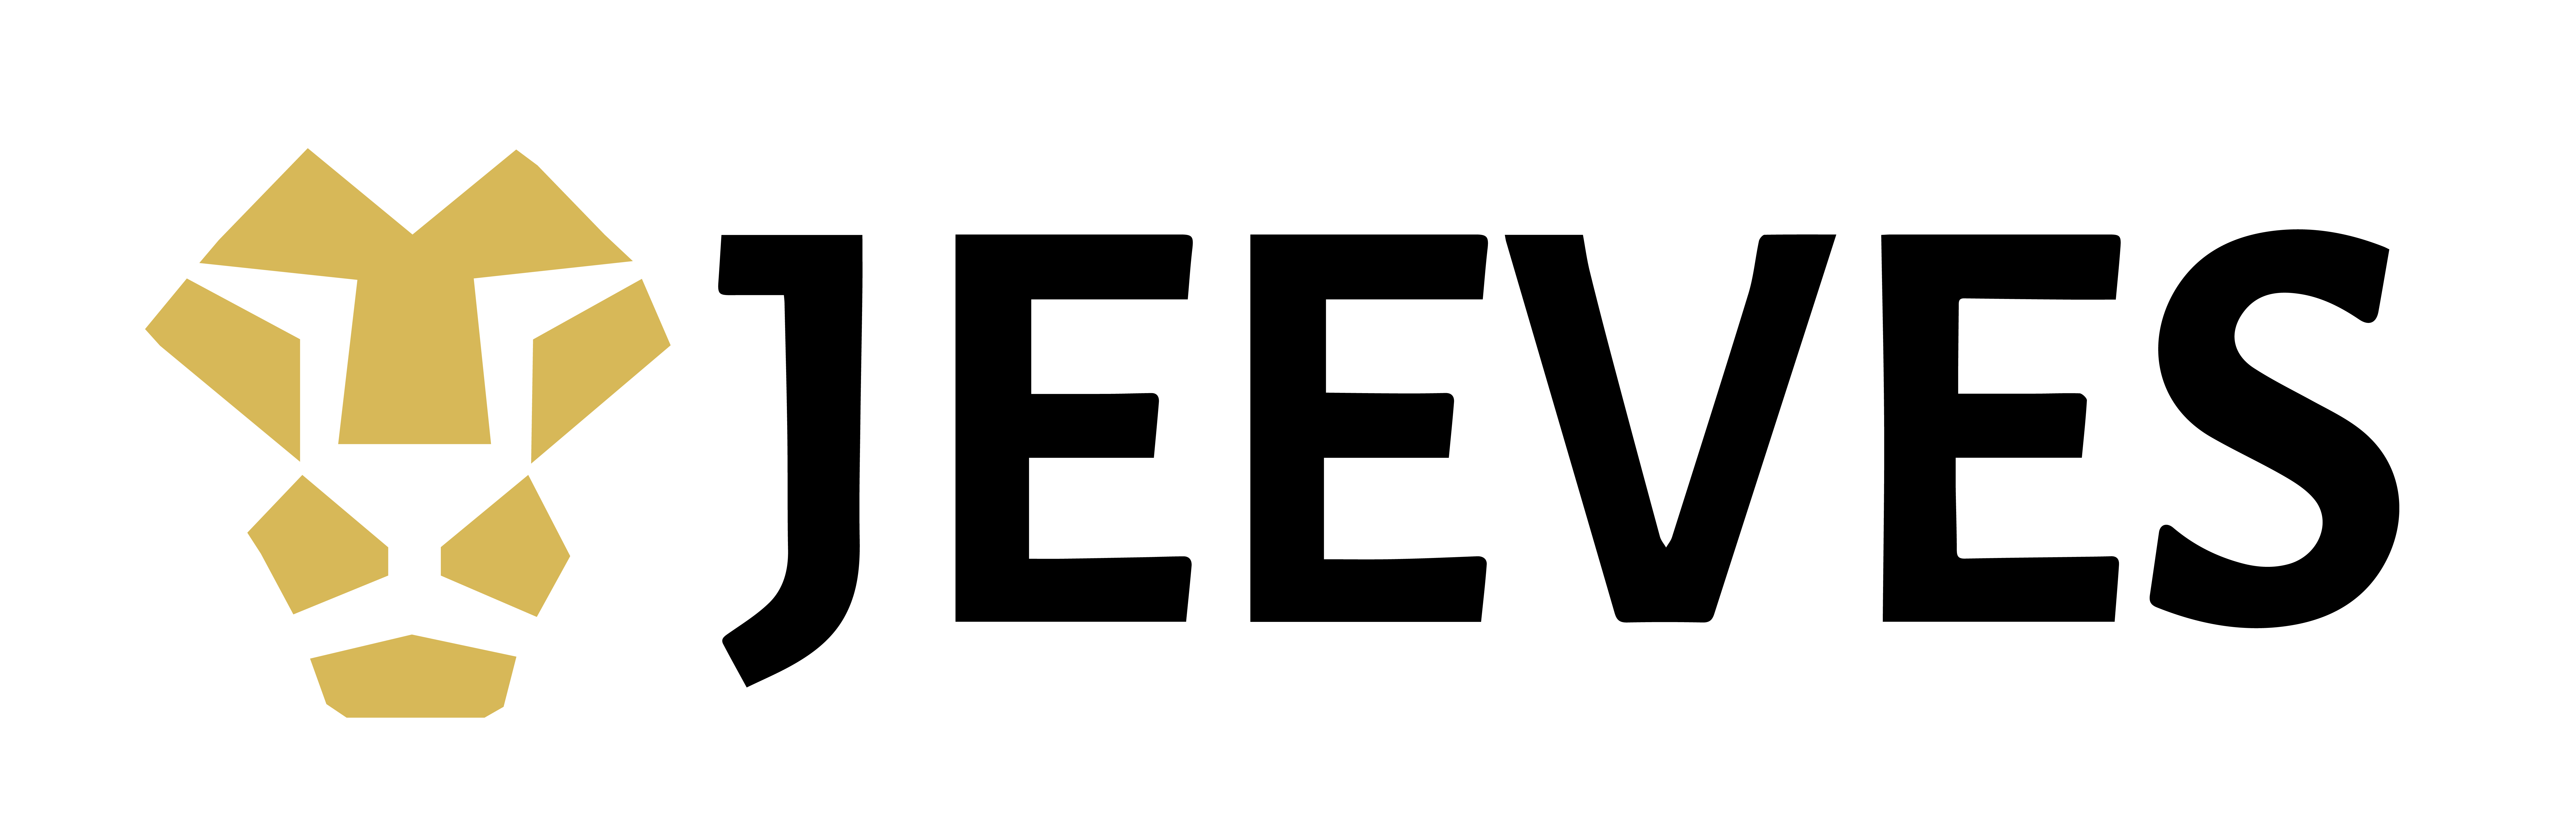 Jeeves's logo